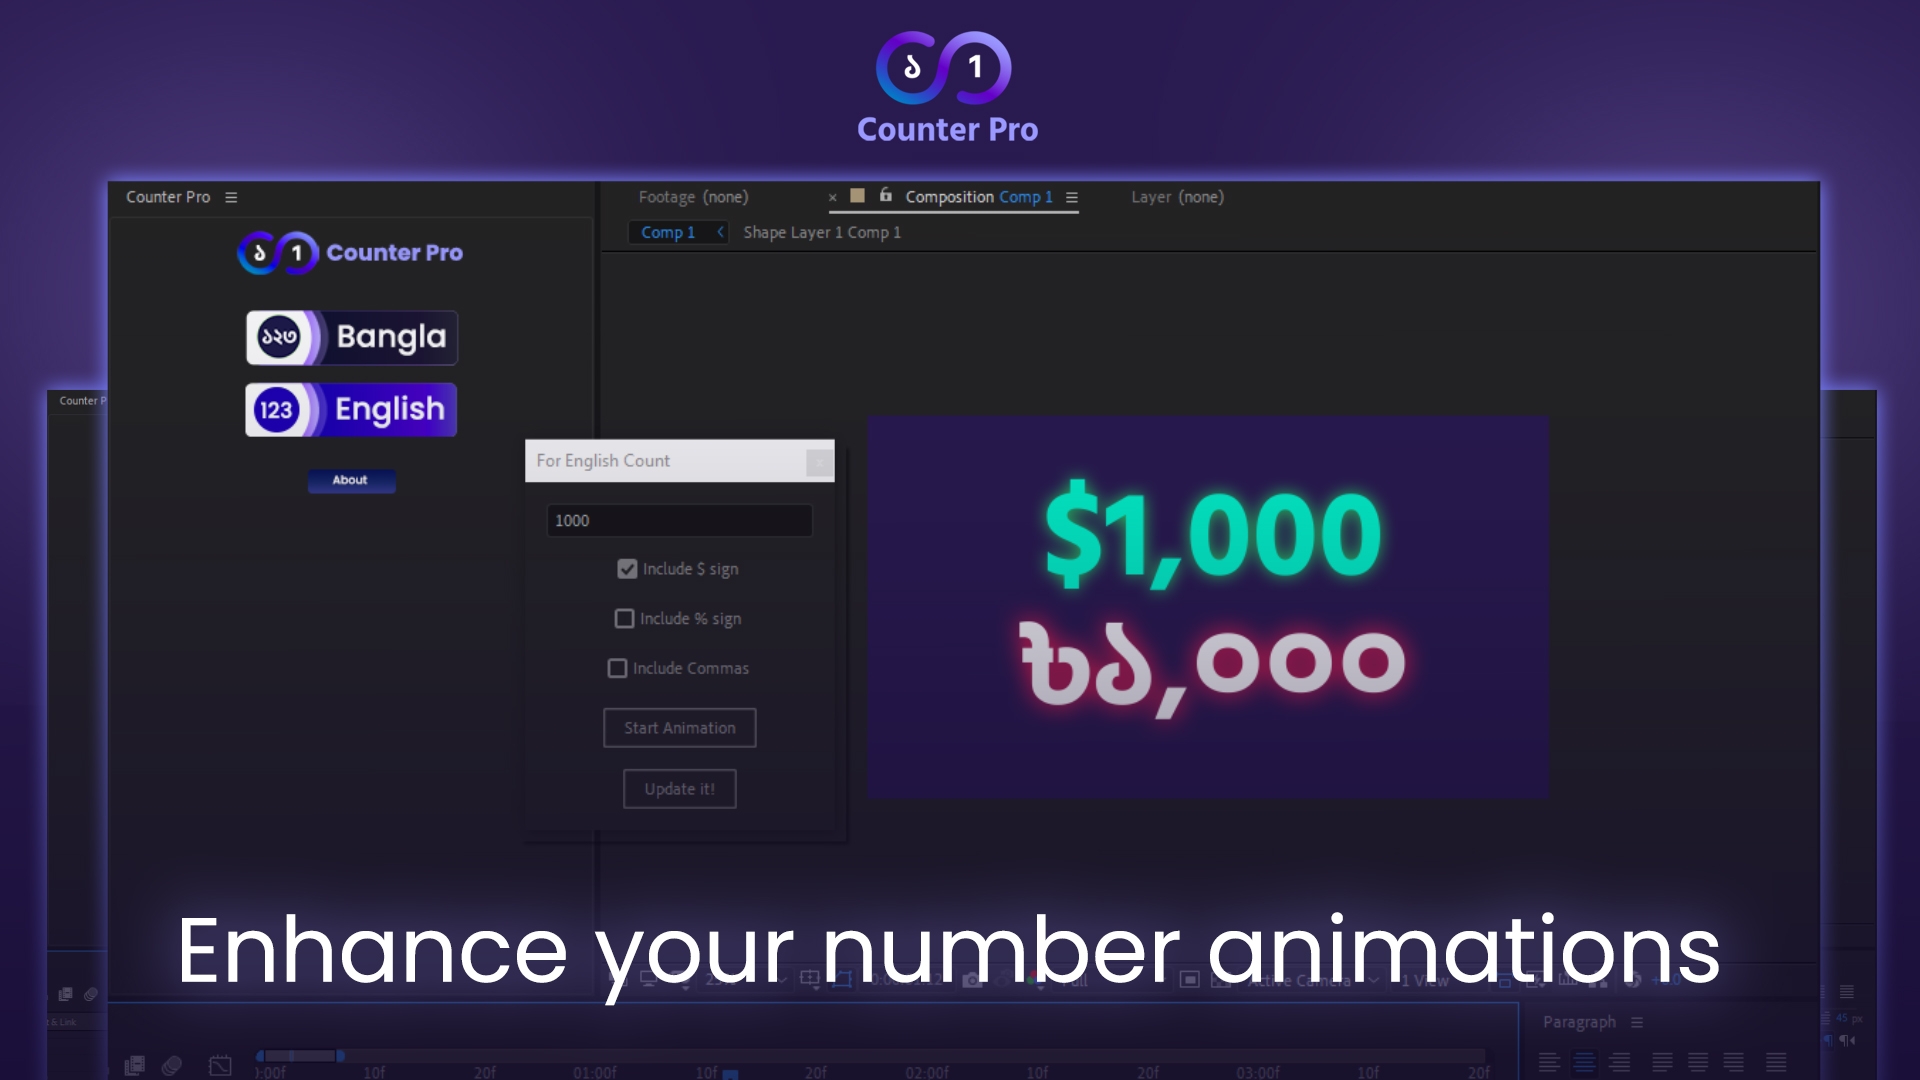 Enhance your number animations